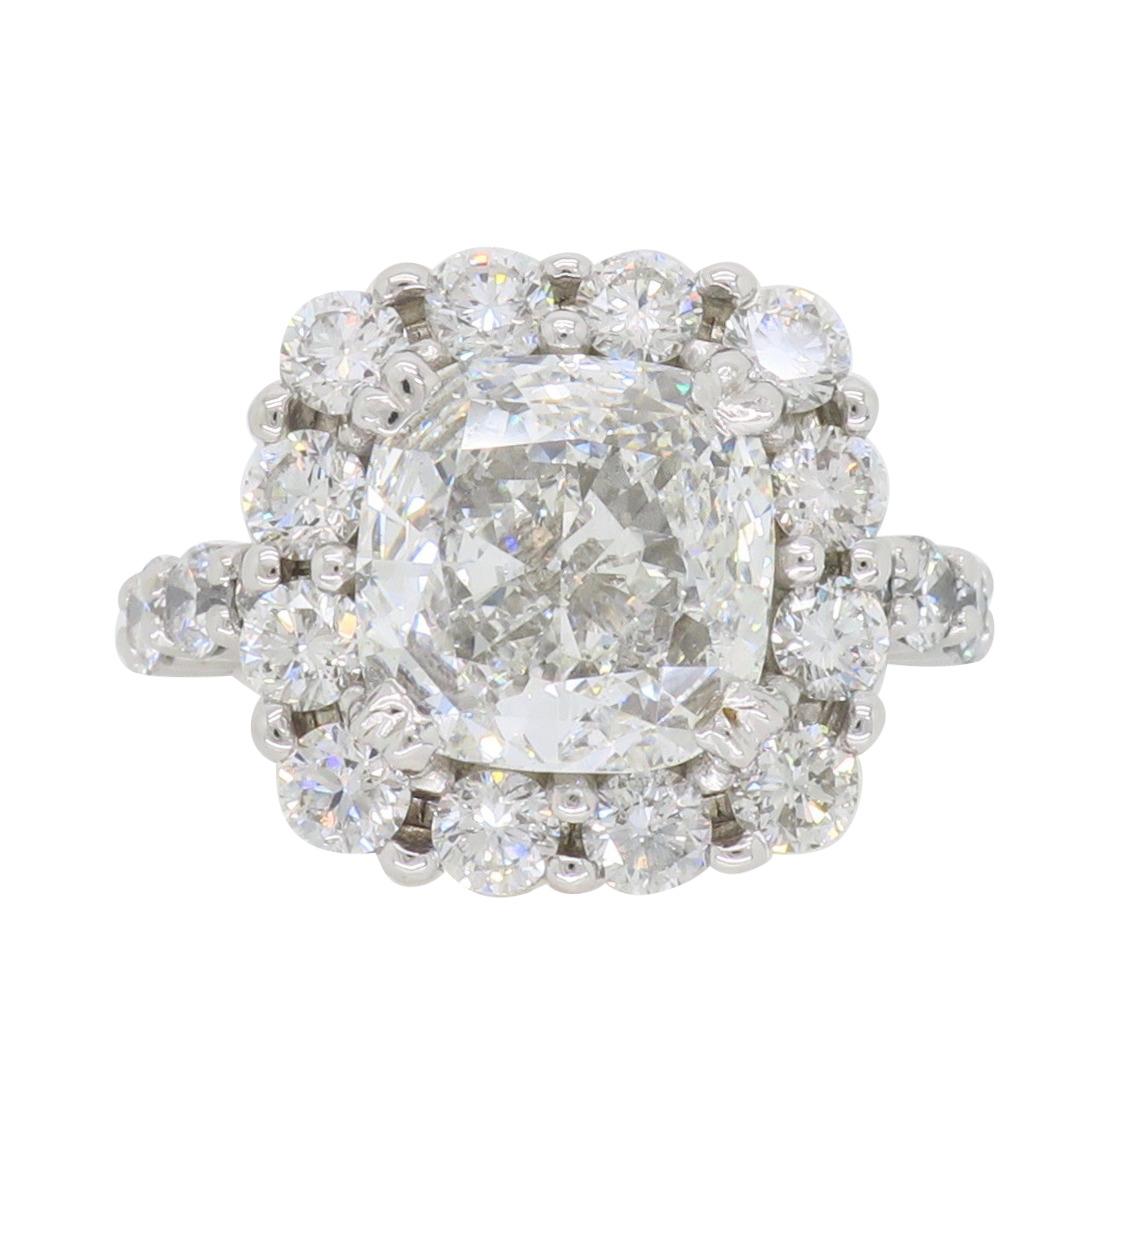 Approximately 5.31CTW GIA certified halo style diamond ring crafted in 14k white gold.

GIA Certified : 16782384 * ELECTRONIC COPY OF CERTIFICATION ONLY *
 
Center Diamond Carat Weight: 3.31CT
Center Diamond Cut: Cushion Modified Brilliant 
Center